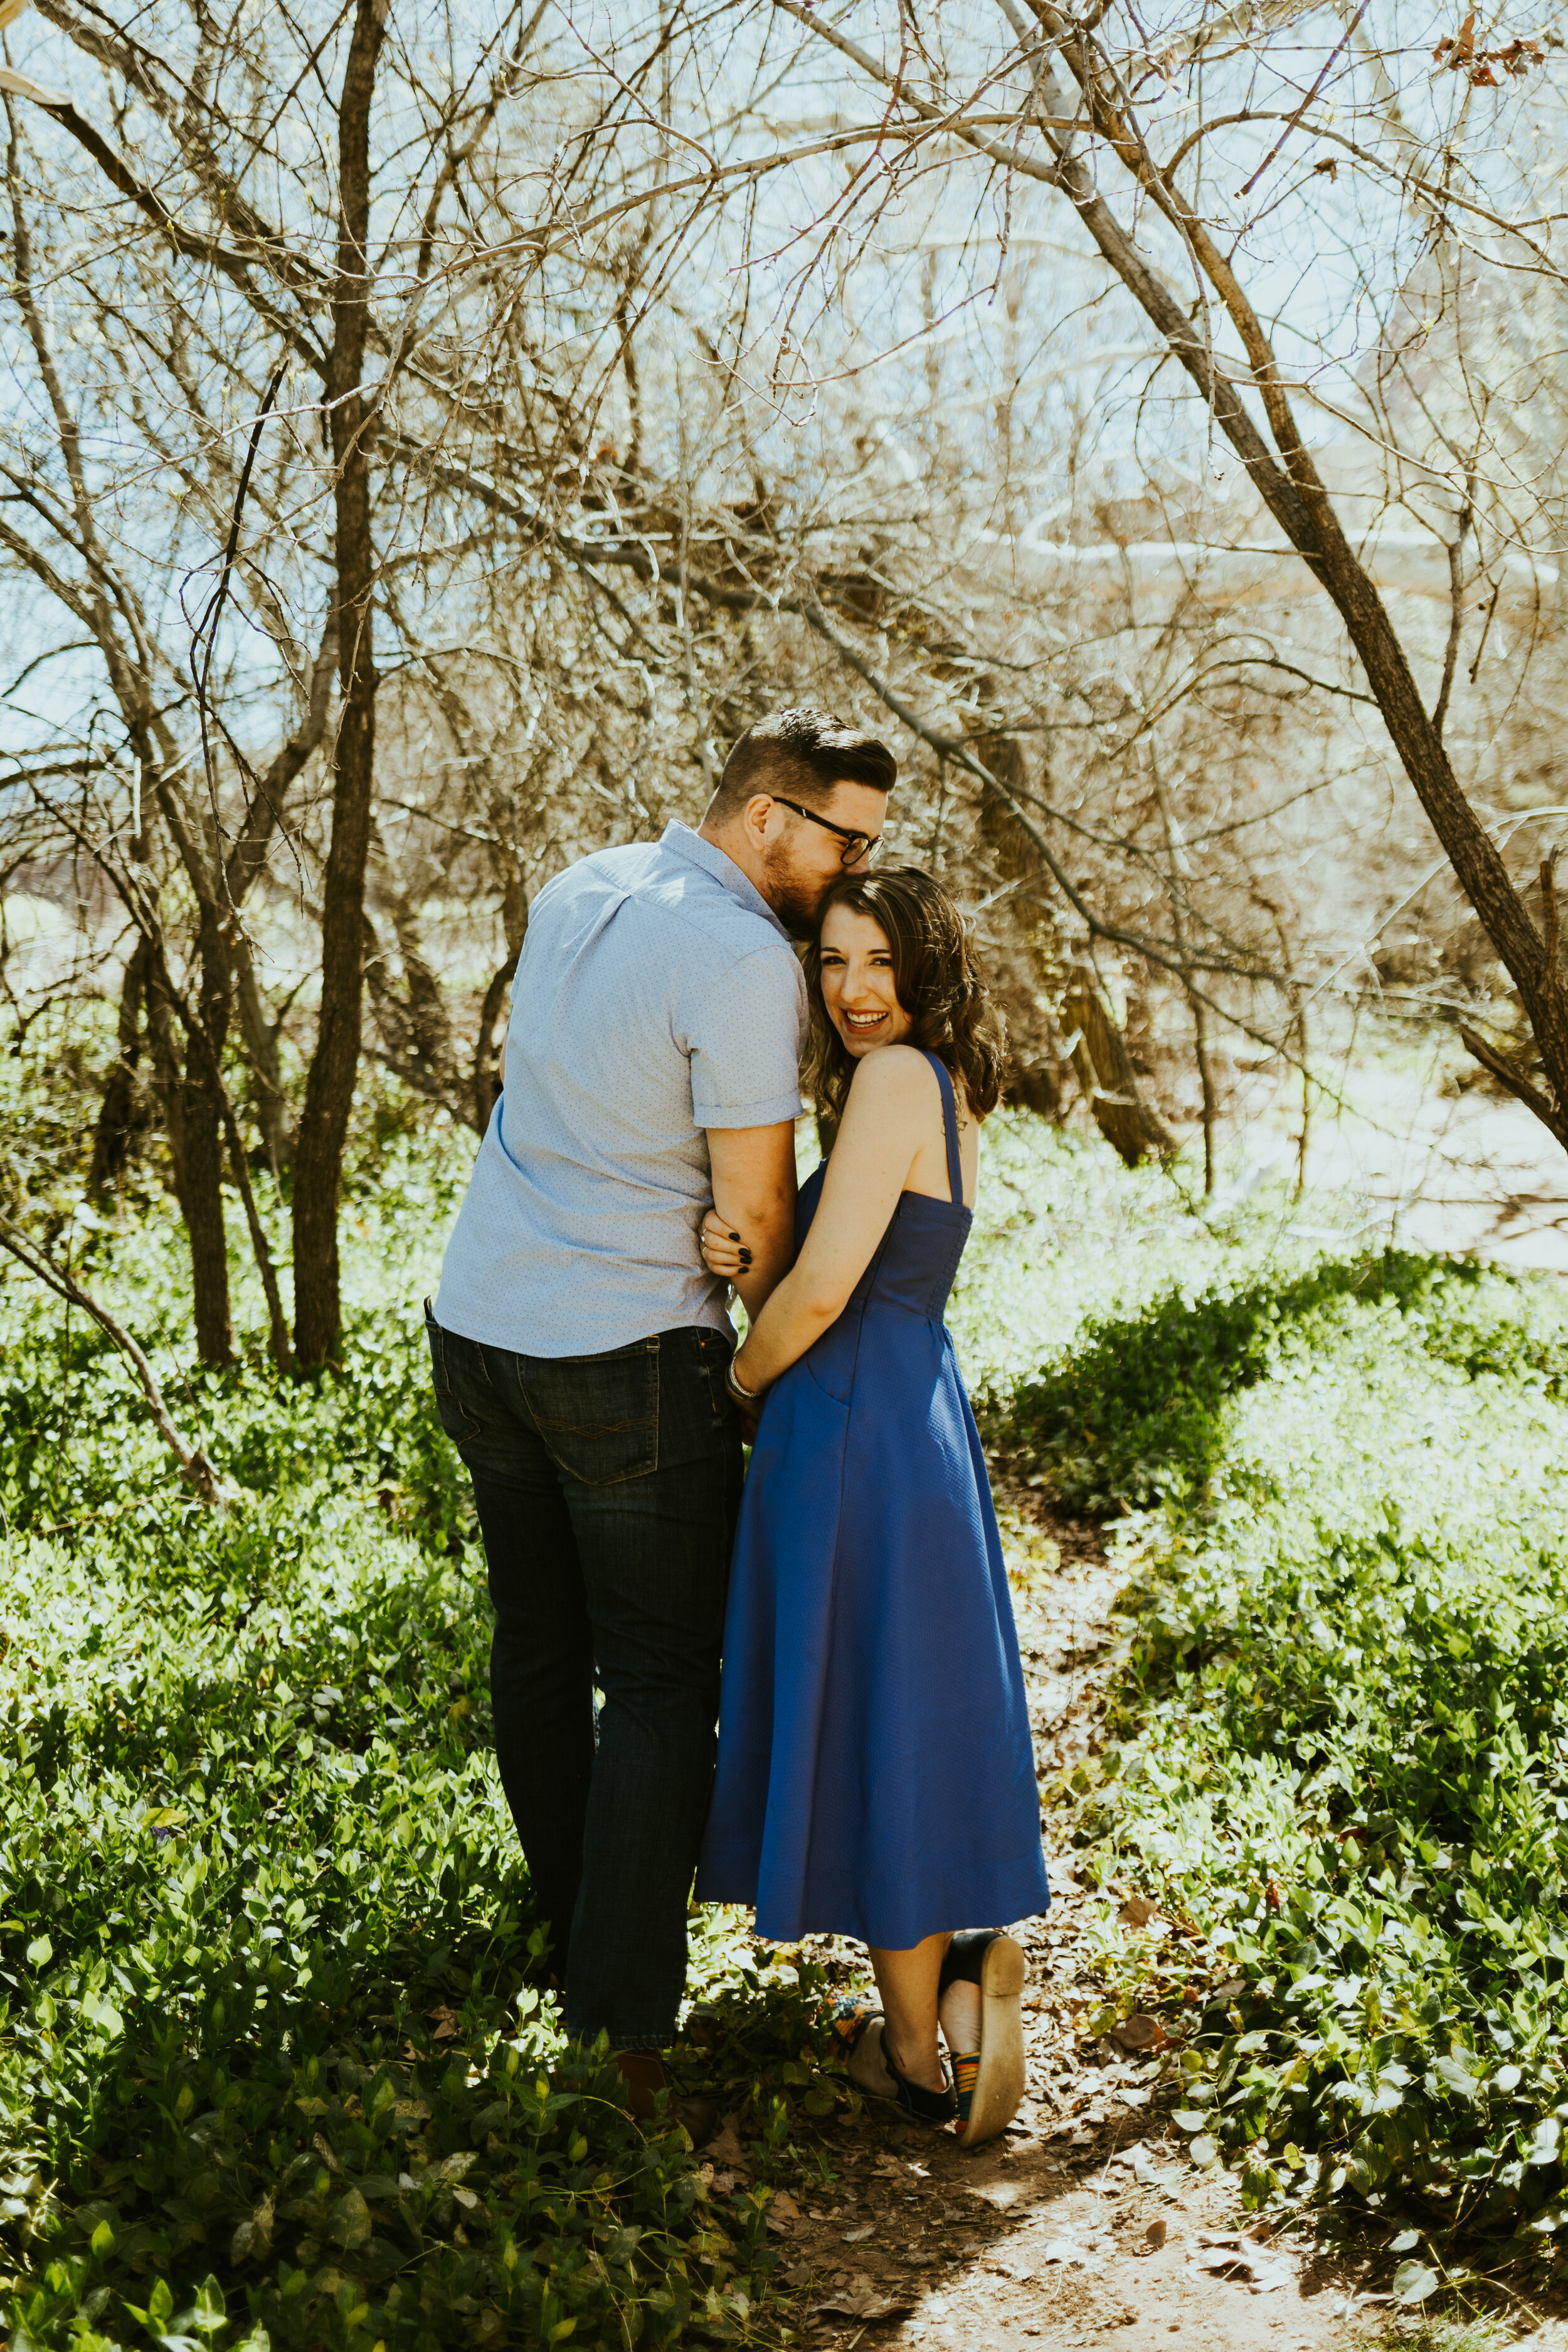 red rock crossing sedona arizona cathedral rock crescent moon ranch couple photos engagement photo outfit inspiration couple posing ideas midday photos-9.jpg